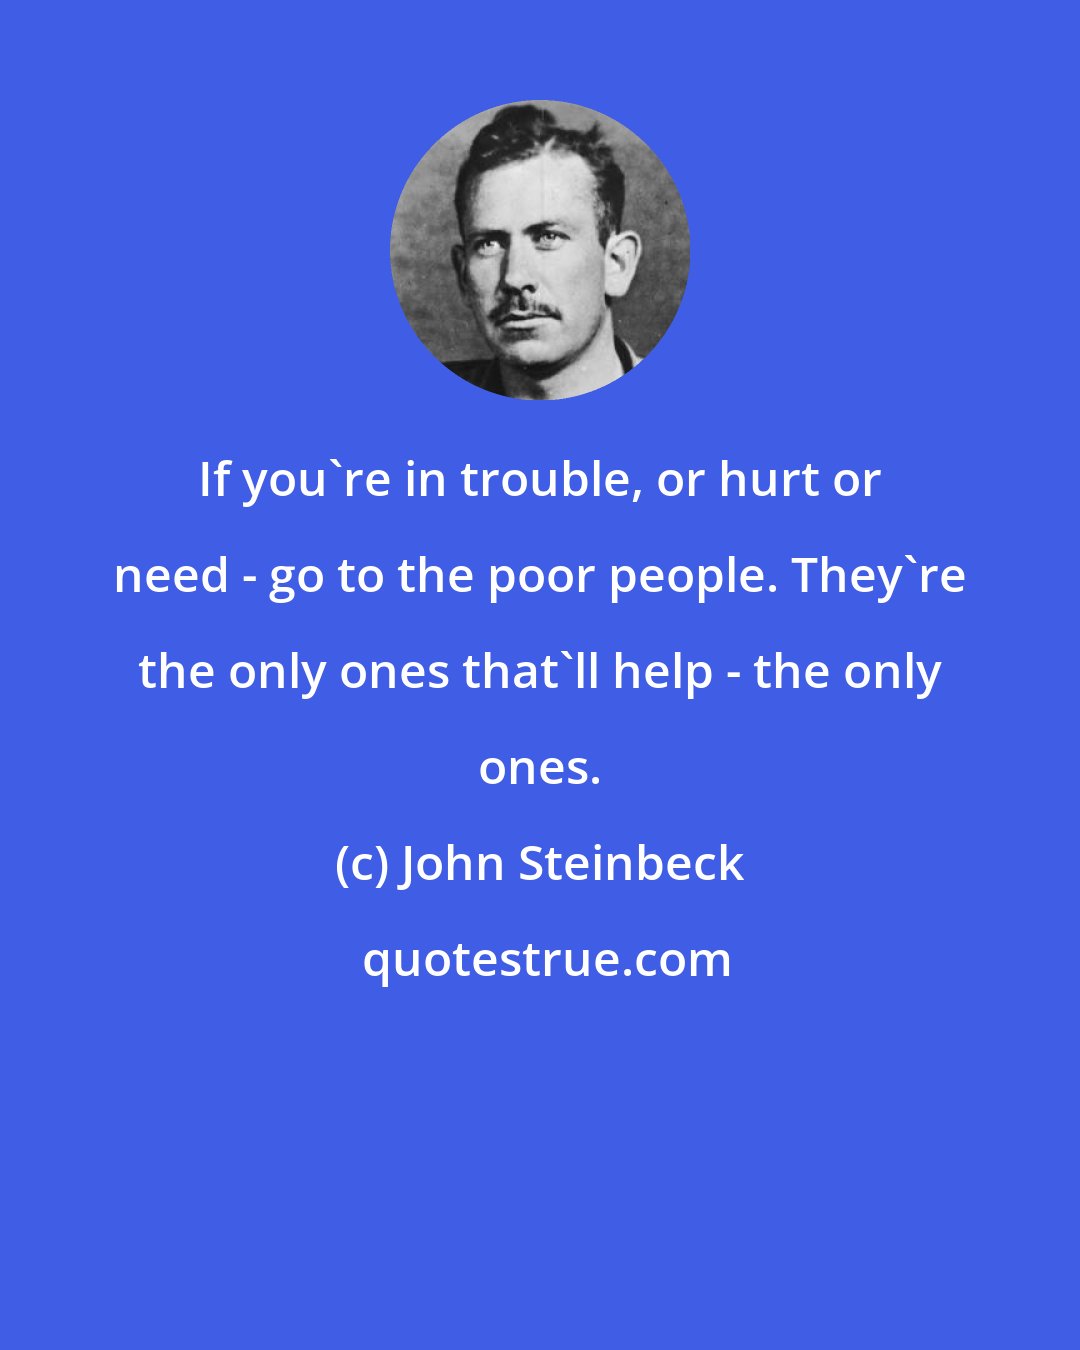 John Steinbeck: If you're in trouble, or hurt or need - go to the poor people. They're the only ones that'll help - the only ones.